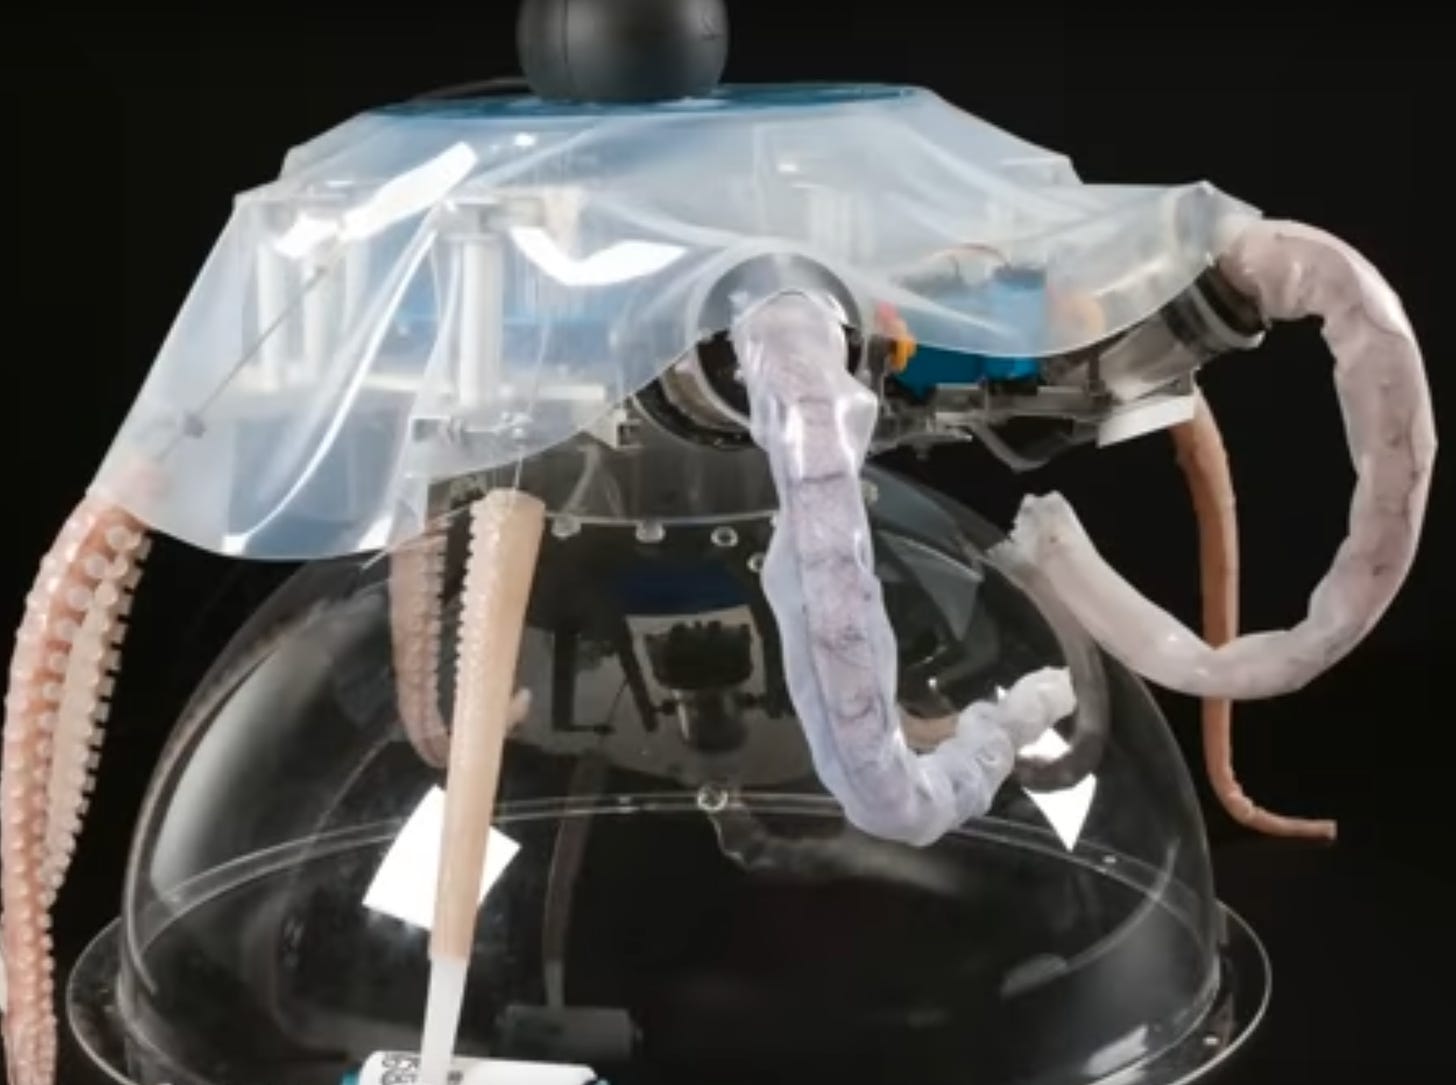 A machine with fake jellyfish legs and a plastic bag on top it looks like a vacuum cleaner with rope tied to it